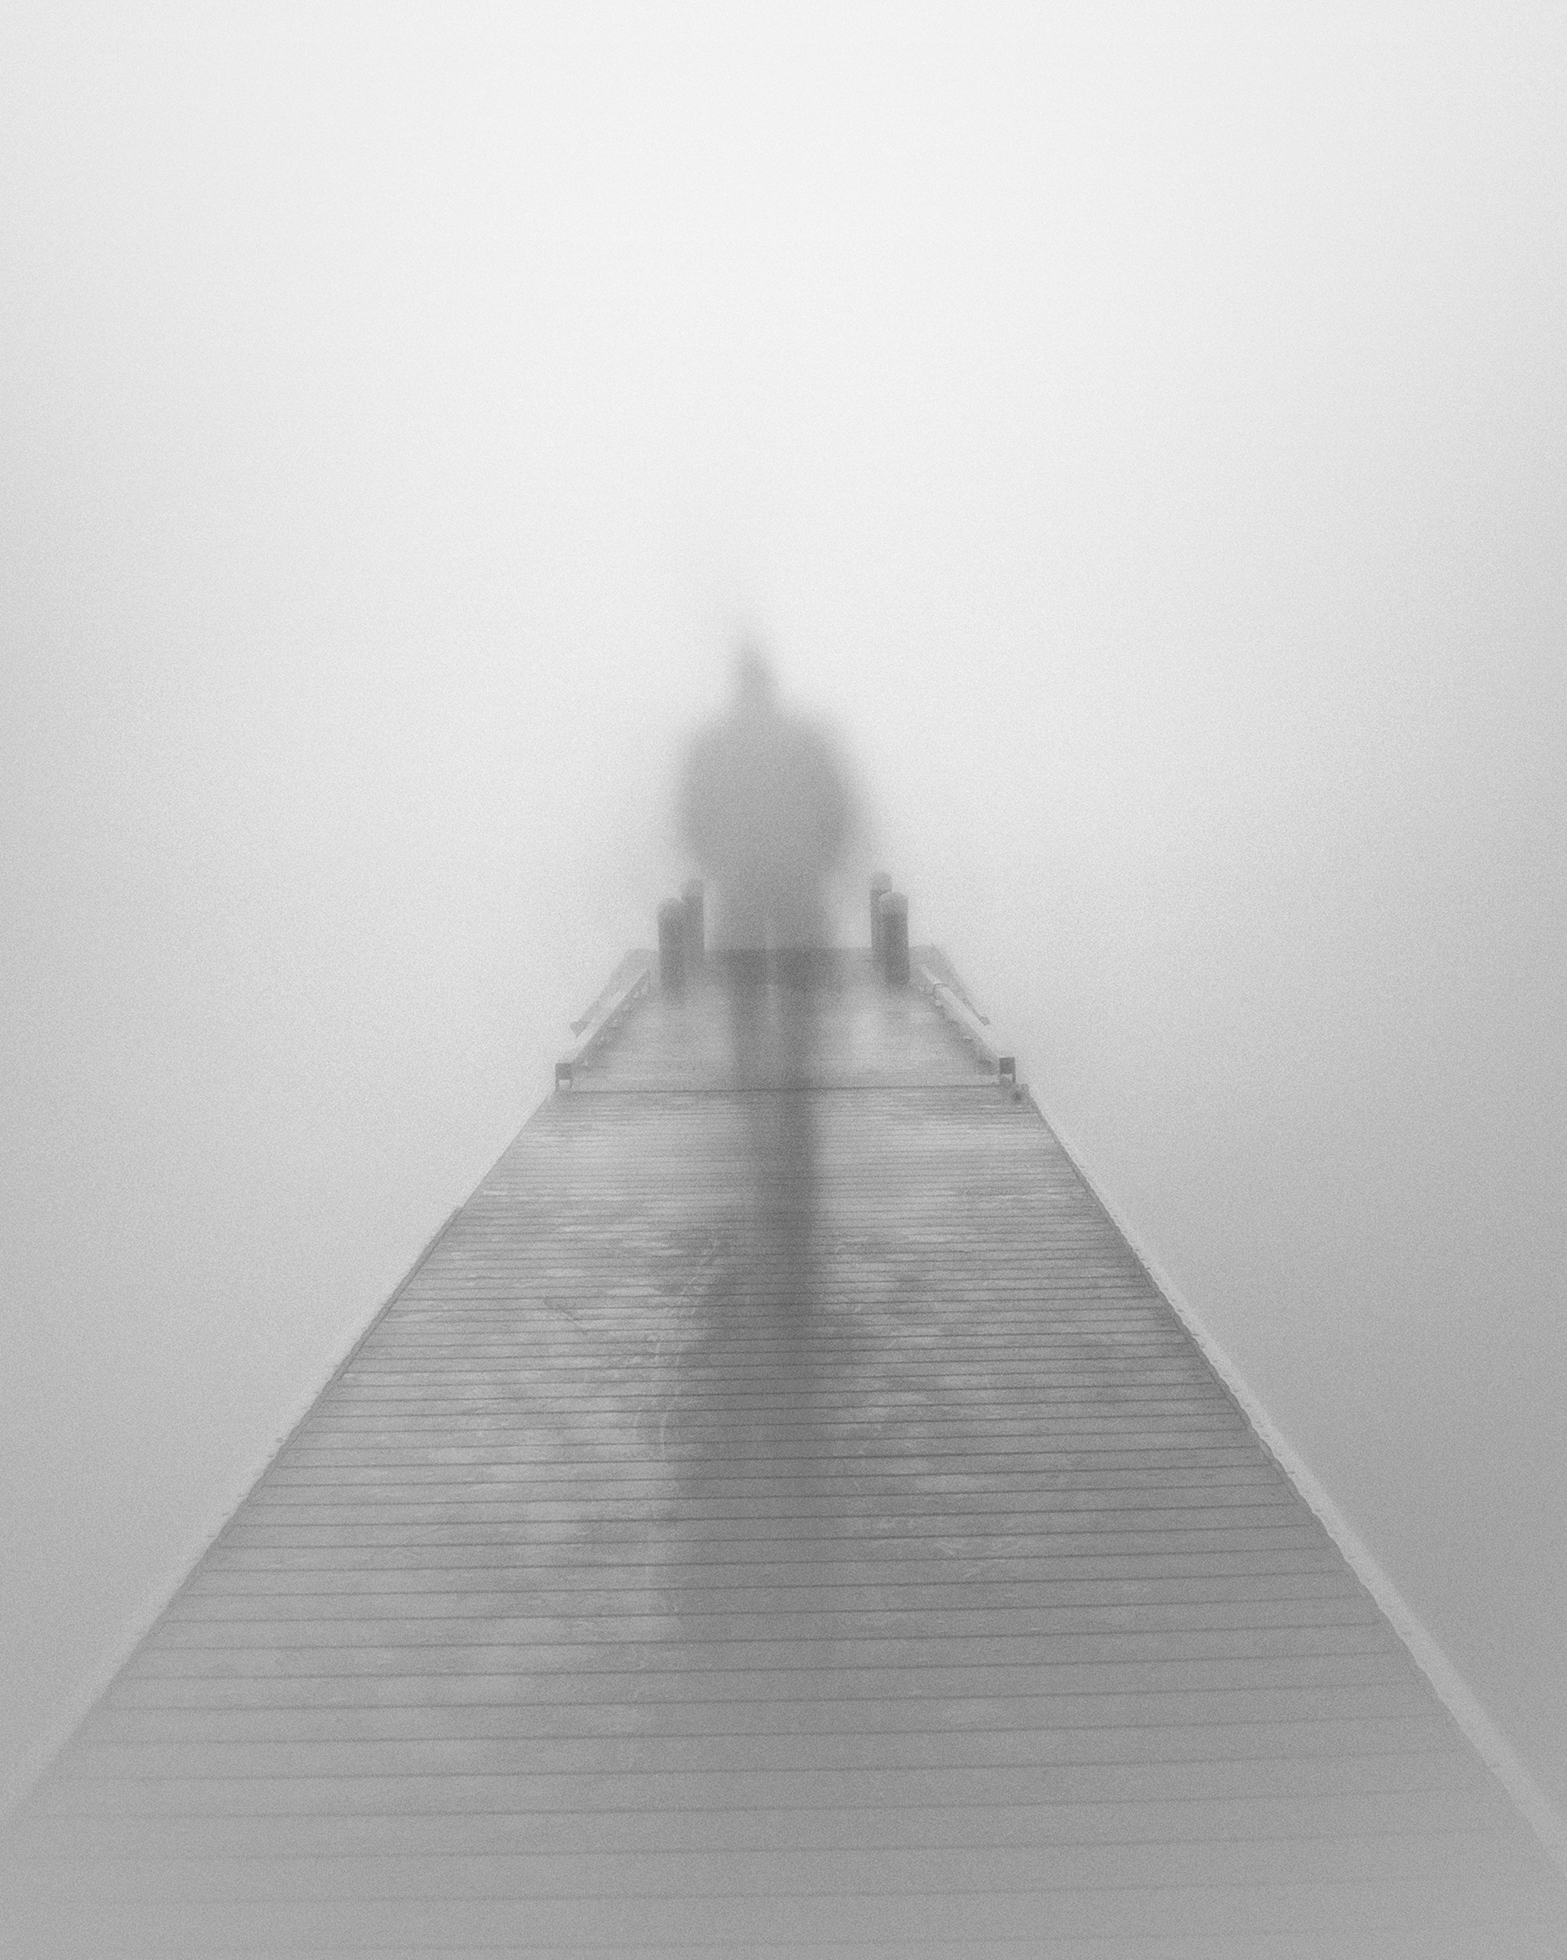 The ghostly silhouette of a person at the end of a pier.